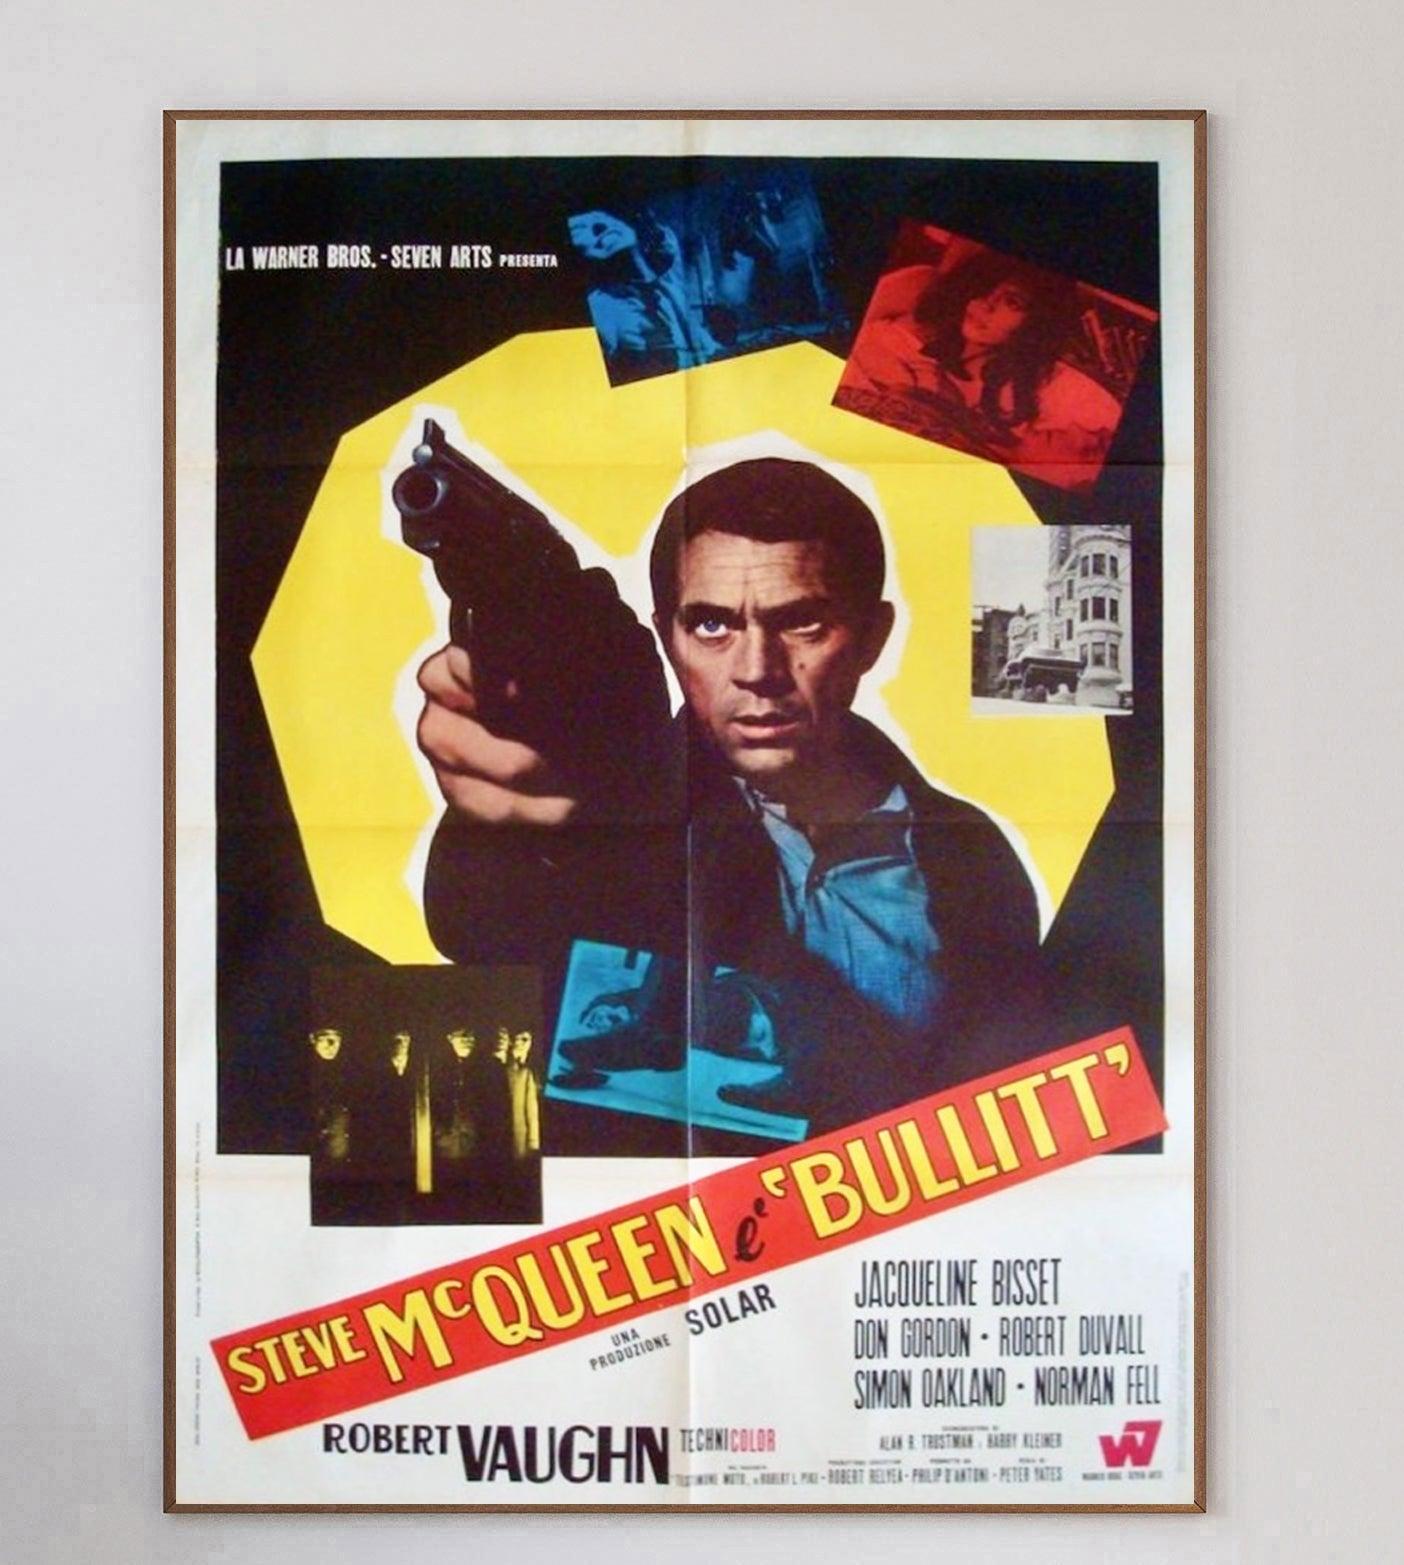 Depicting the iconic image of McQueen in the titular role, this extremely rare and stunningly designed poster for Bullitt is a treasure from the mid-century. This extra-large and vibrant design is from the original release of the film in Italy, and